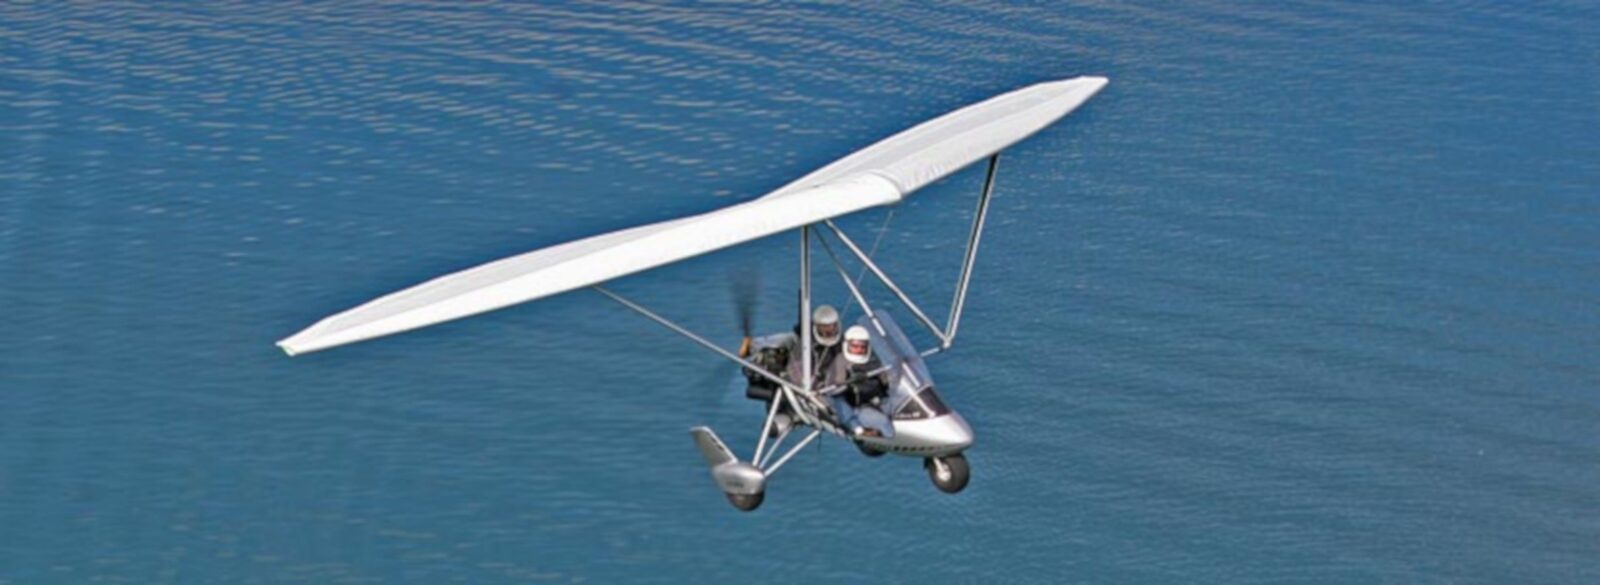 Flying above the ocean in a microlight